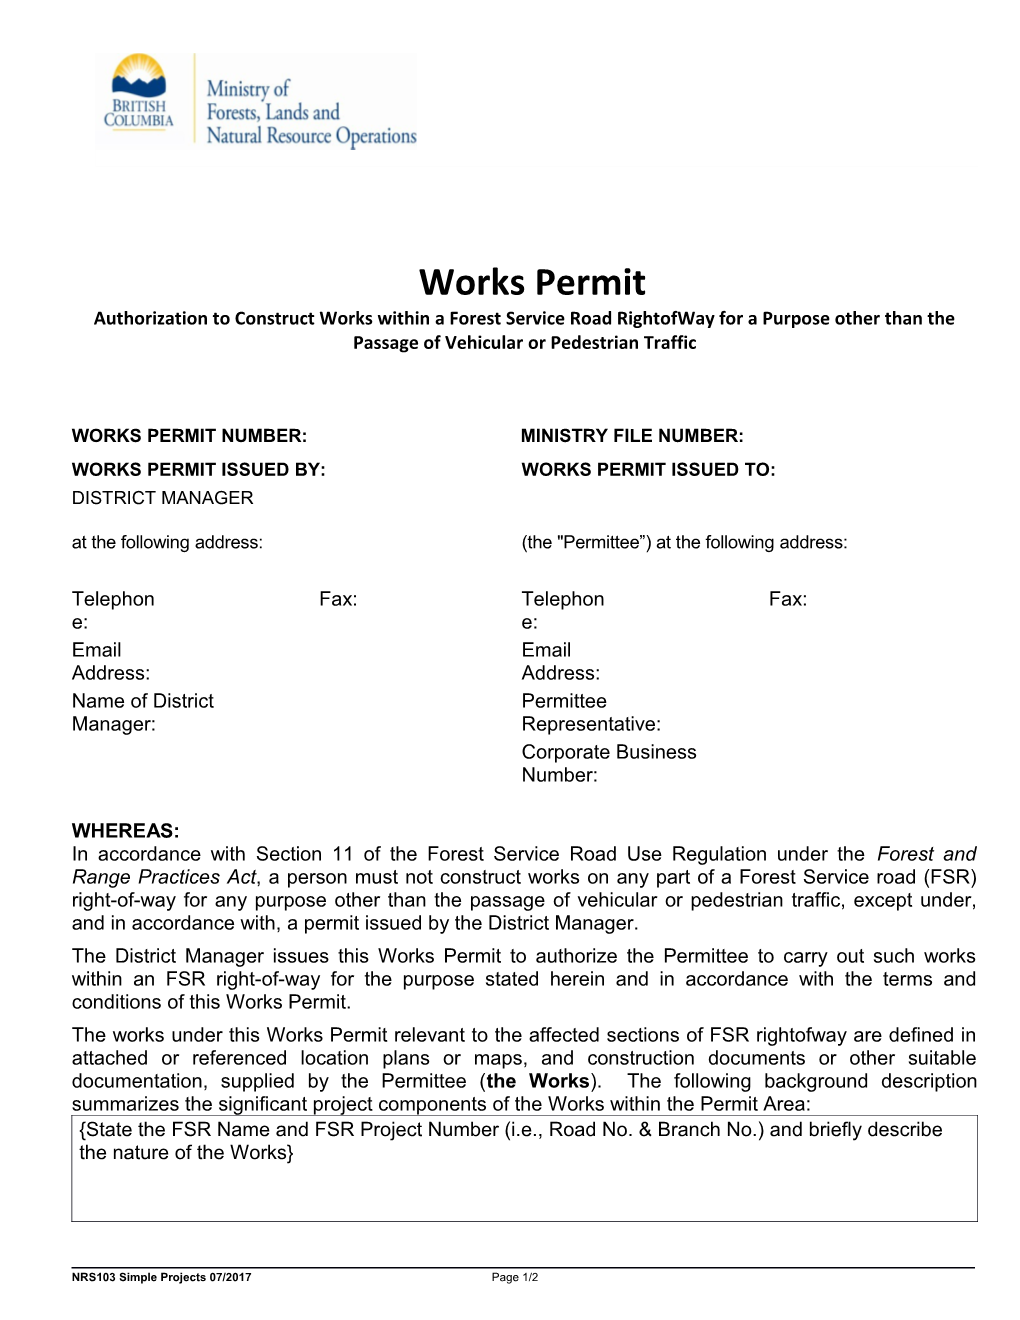 Works Permit Number: Ministry File Number s1